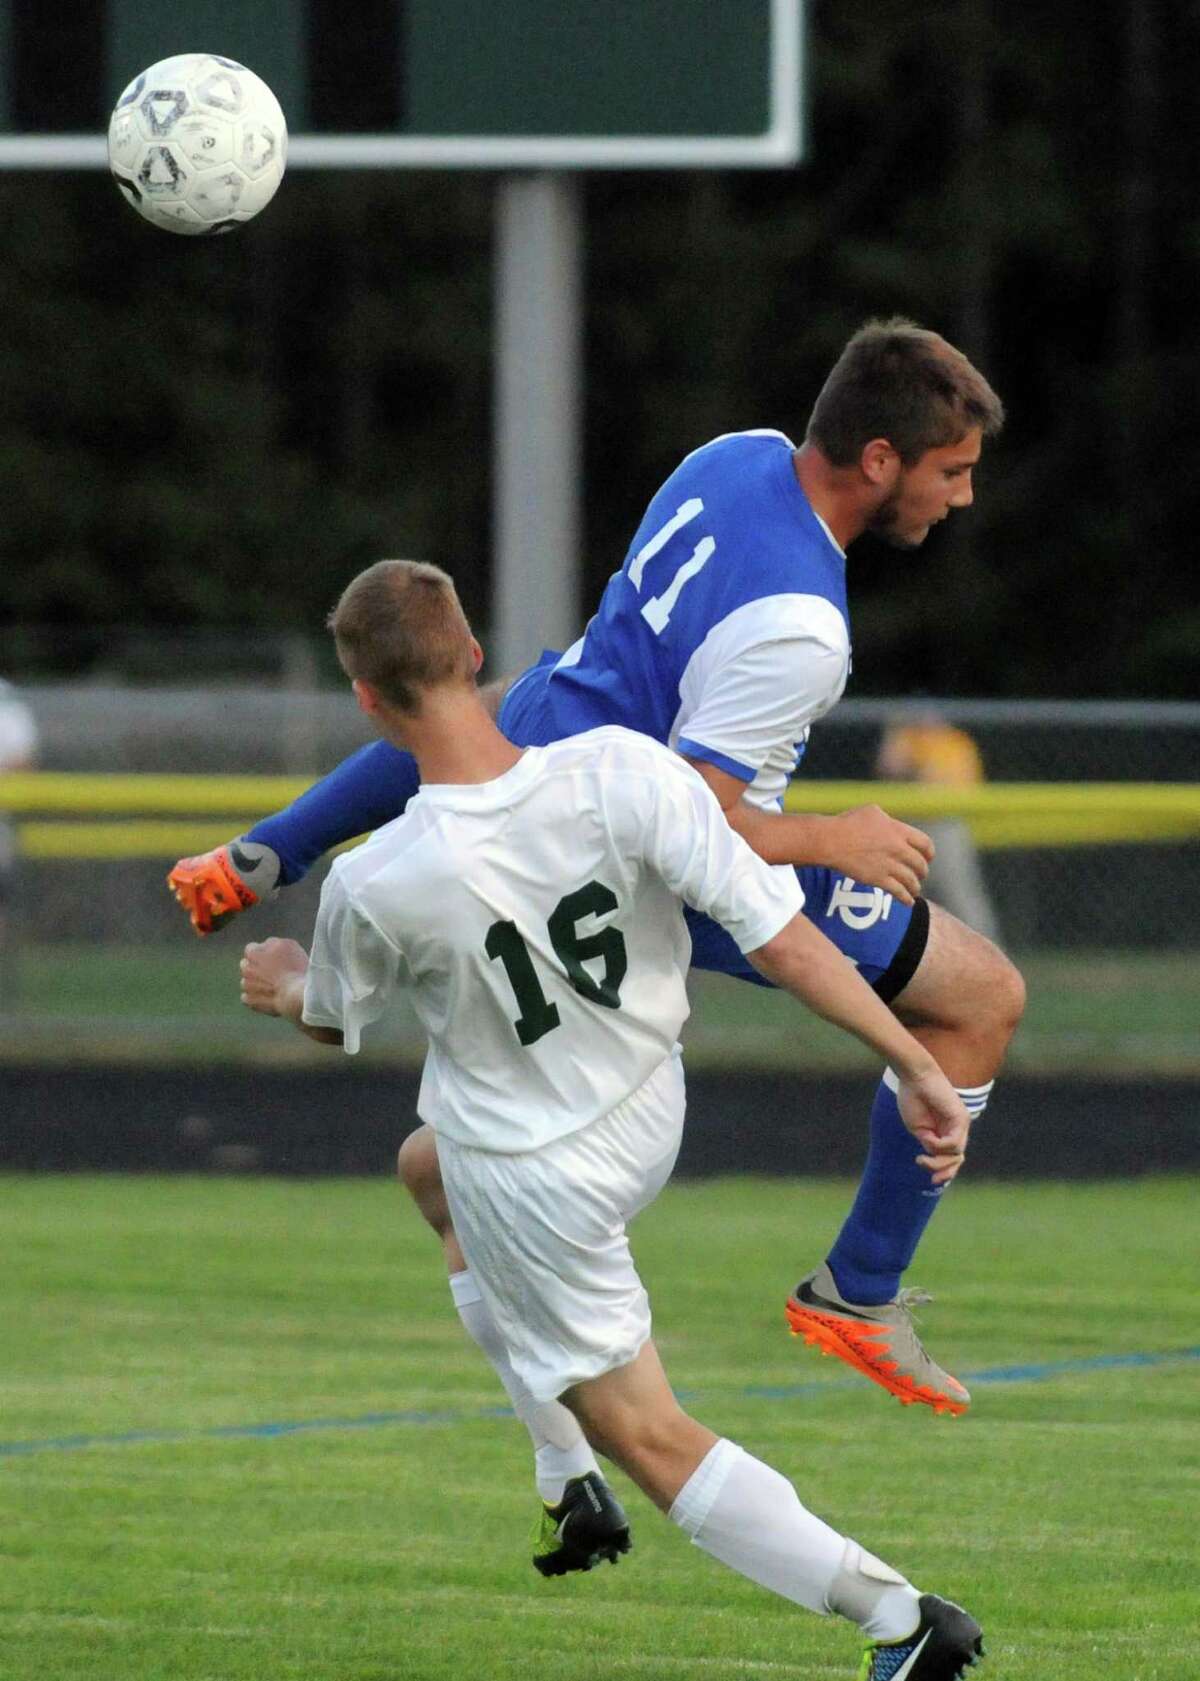 Schalmont's Ryan Older and Ichabod Crane's Bryant Halpin battle for the ball during their boy's high school soccer game on Tuesday Sept. 22, 2015 in Schenectady, N.Y. (Michael P. Farrell/Times Union)